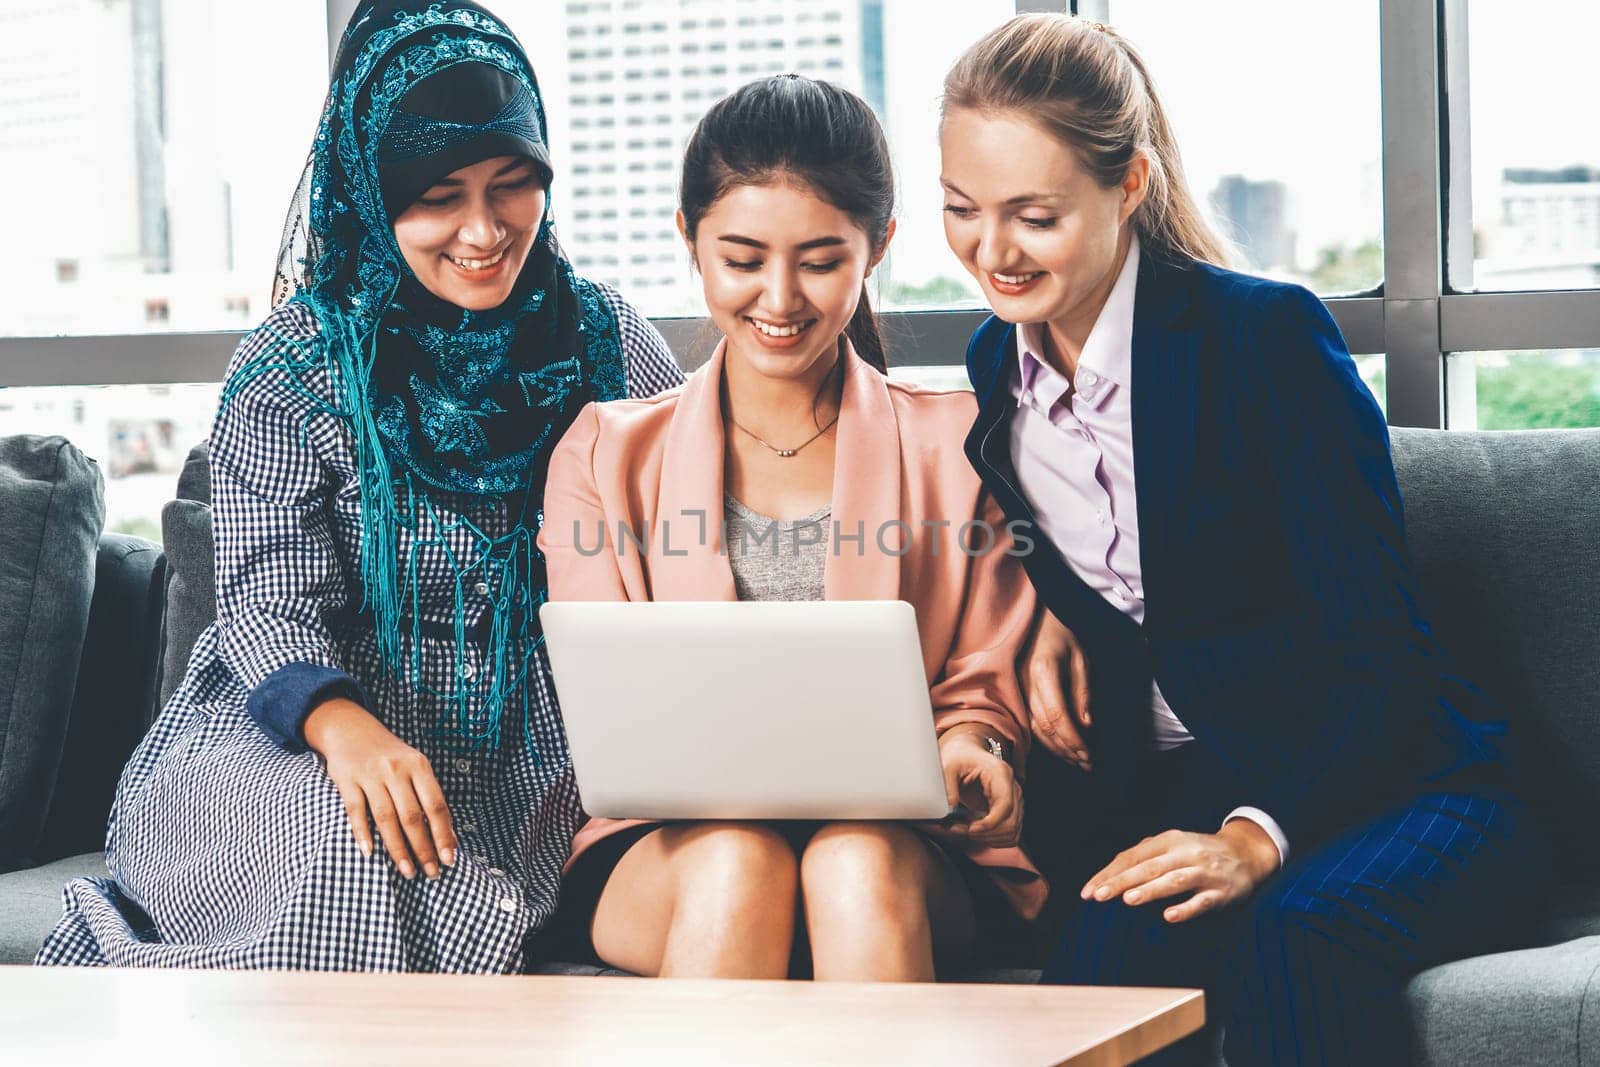 Multicultural working group. Team of businesswomen of different ethnicity, Caucasian, Asian and Arabic working together with laptop computer at office workplace. Multiethnic teamwork concept. uds